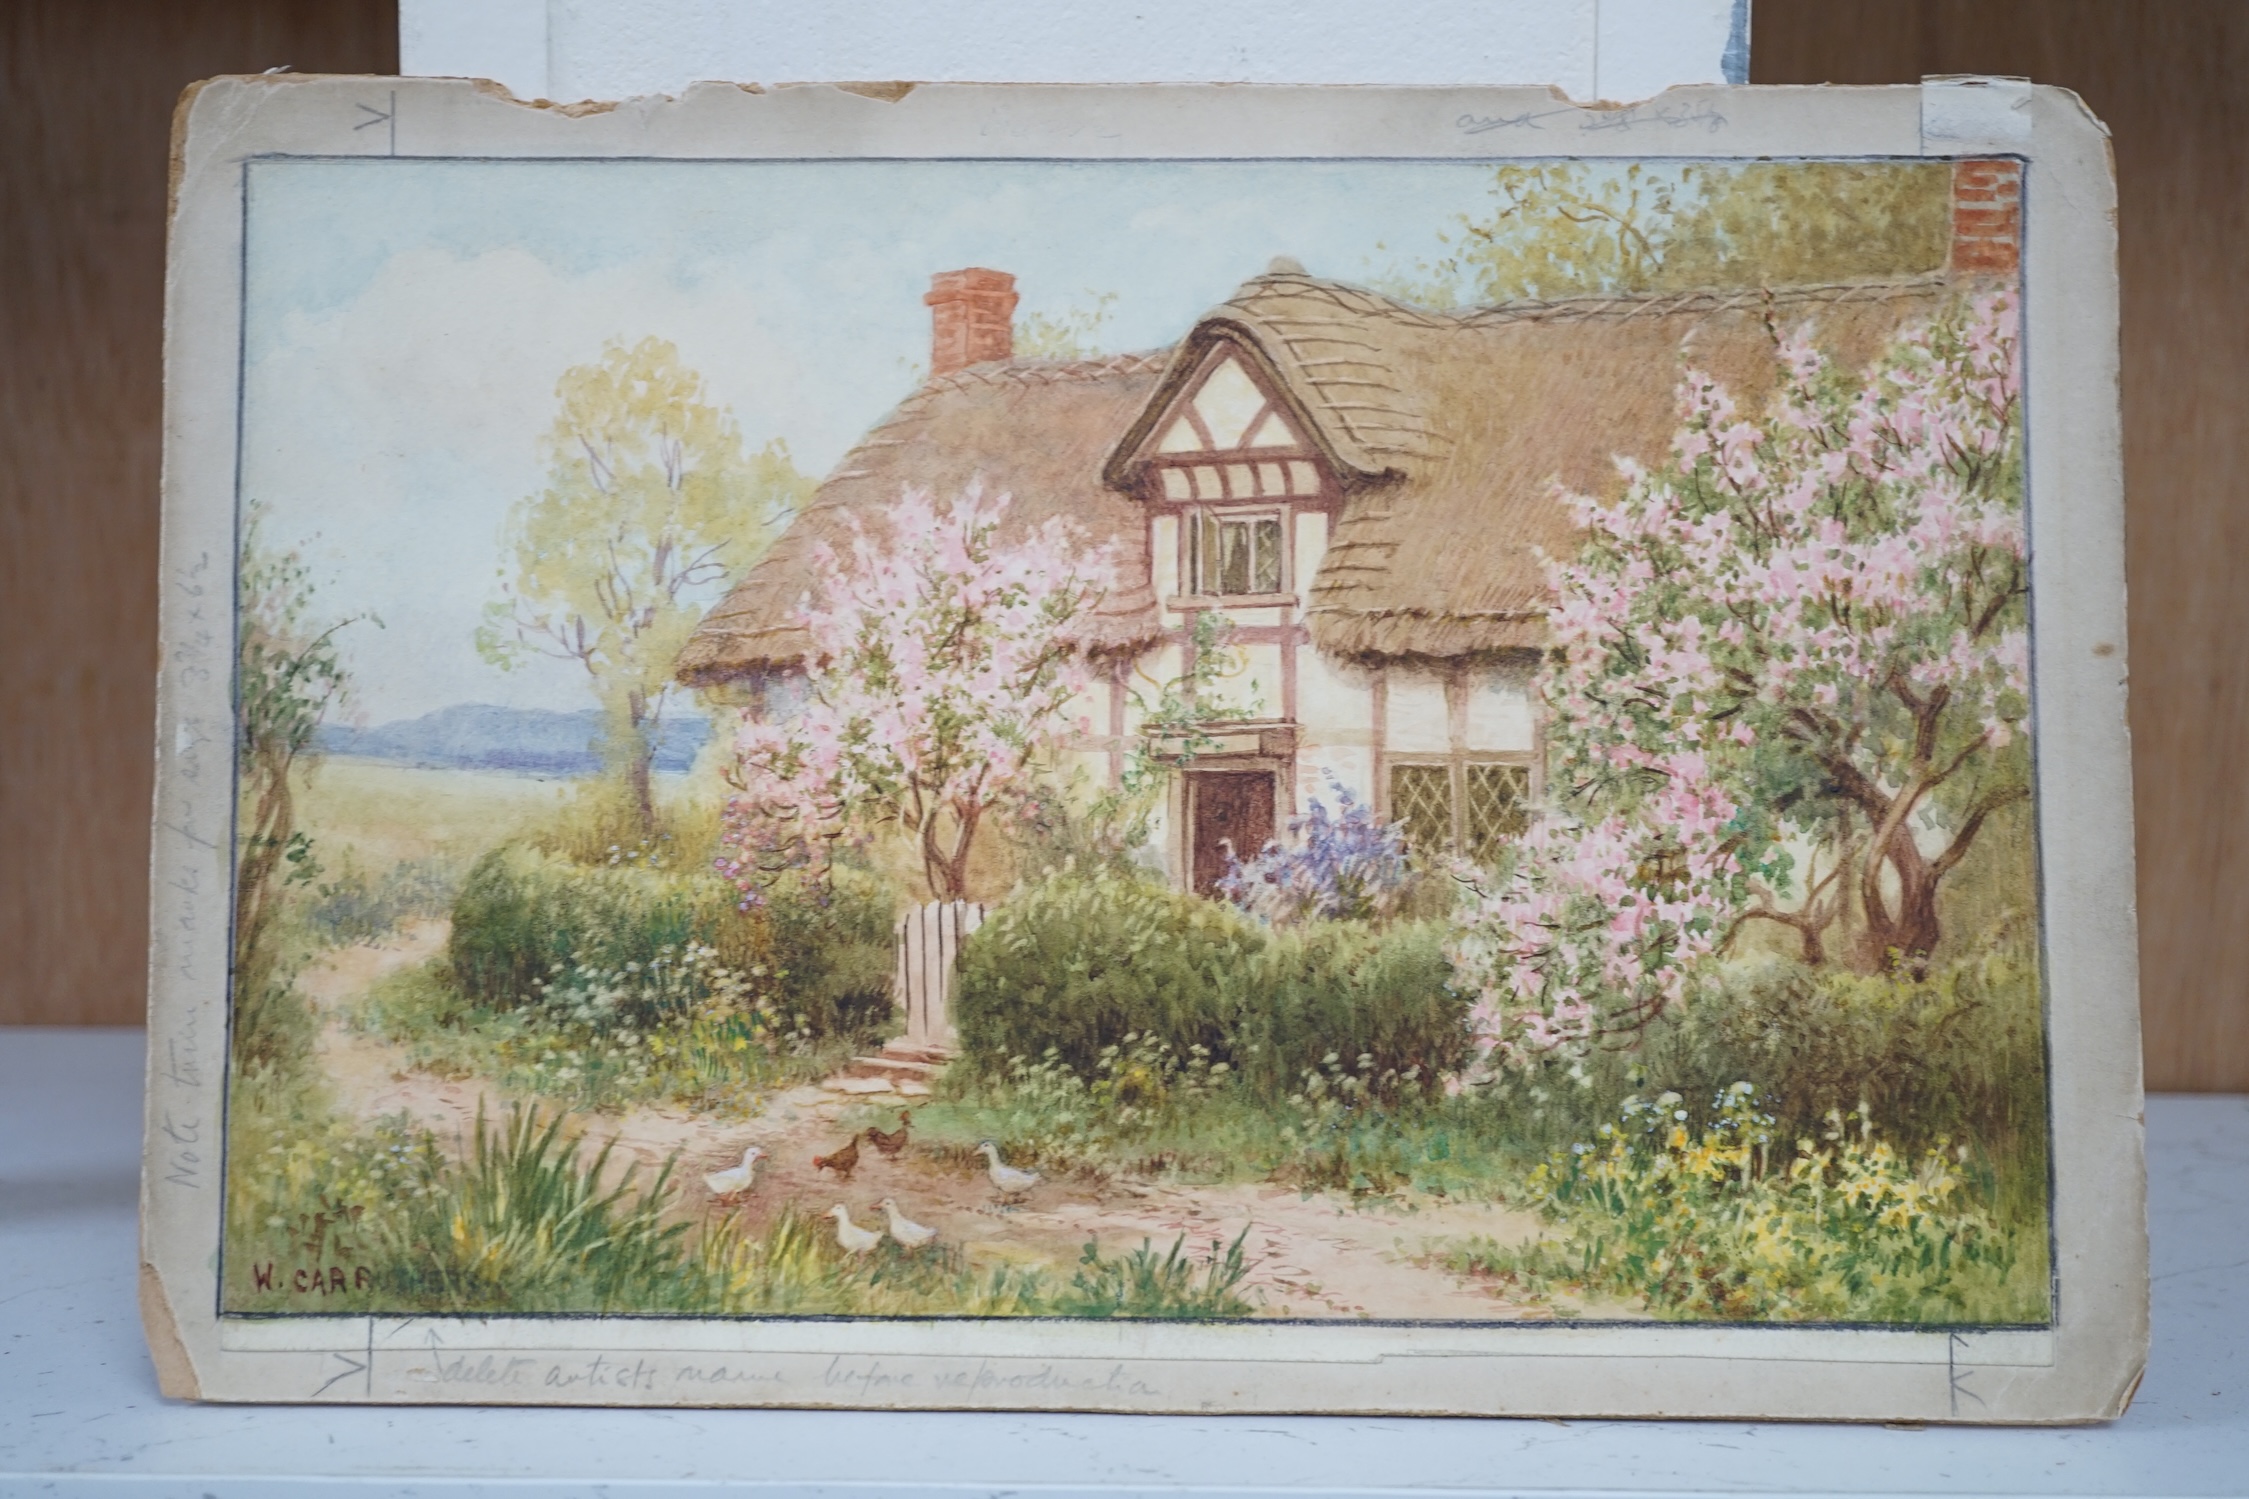 William Affleck (aka, William Carruthers, 1868-1943), four watercolours on card, ‘Springtime at Cropthorne, Worcestershire’, ‘Surrey cottage at Witley’, ‘Cottage at Welford-on-Avon, Warwickshire’ and ‘Stonewall Farm, Cha